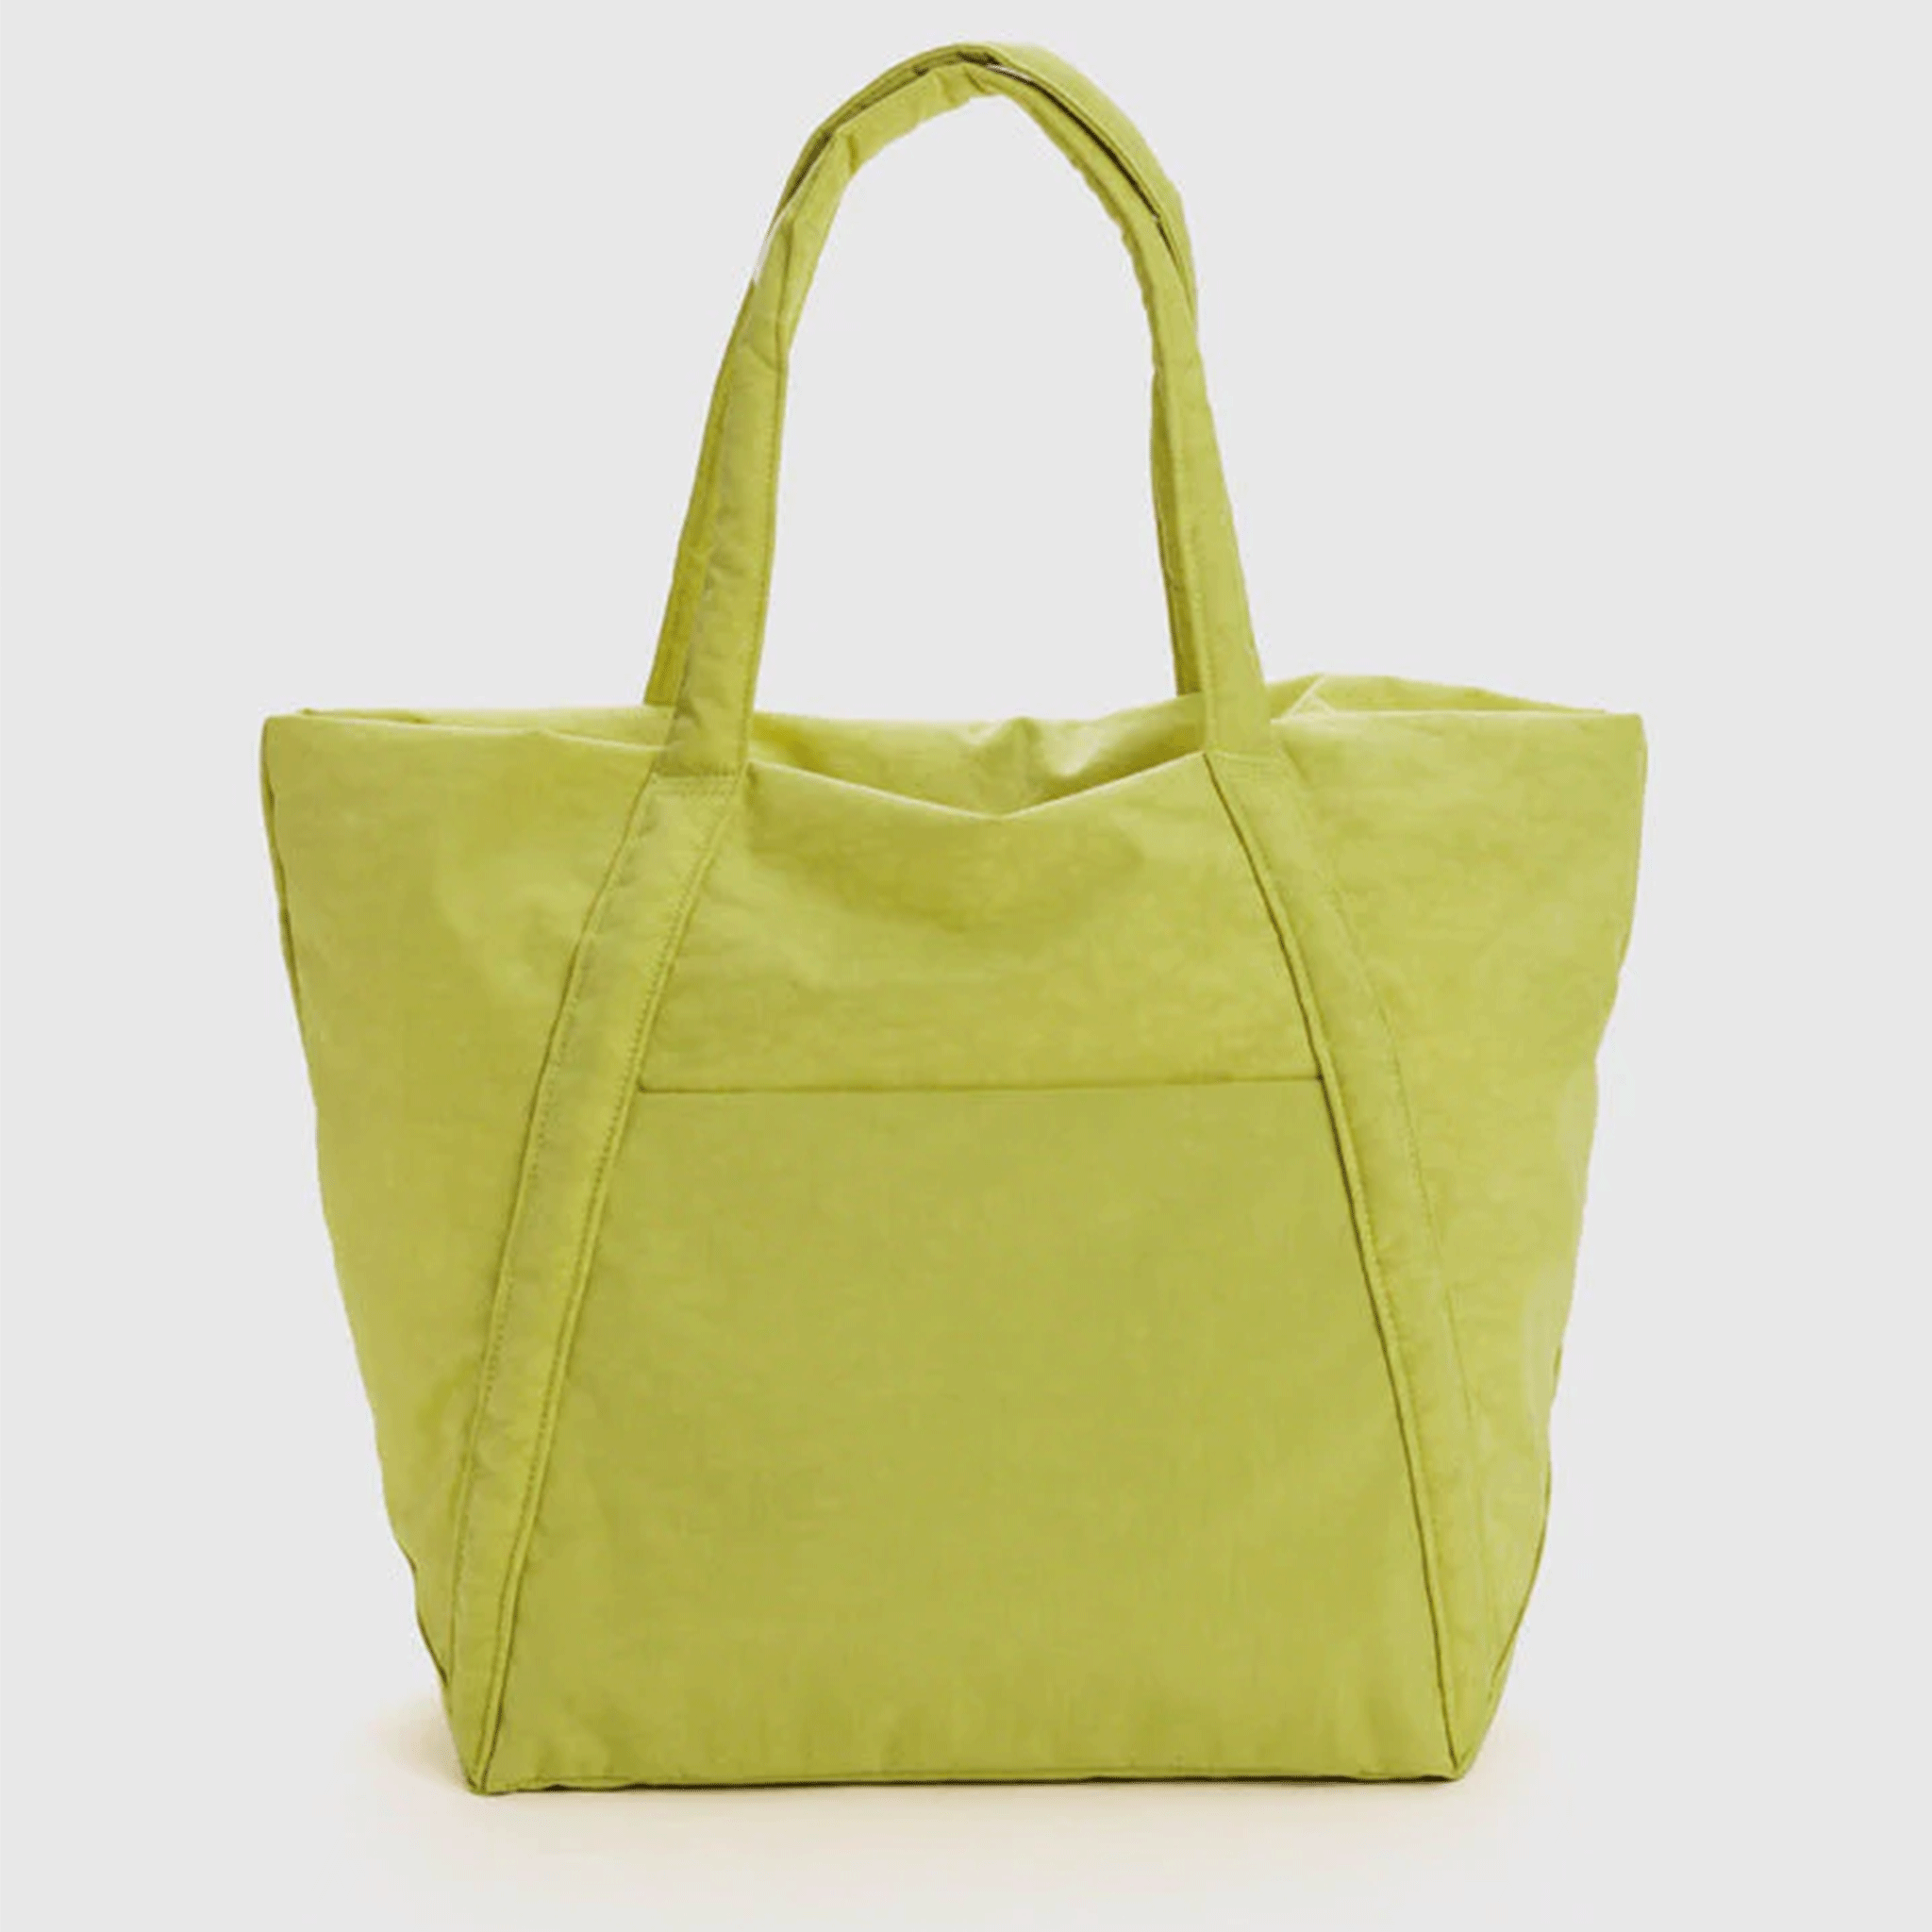 On a white background is a lime green nylon tote bag with a puffy finish and two shoulder straps. 